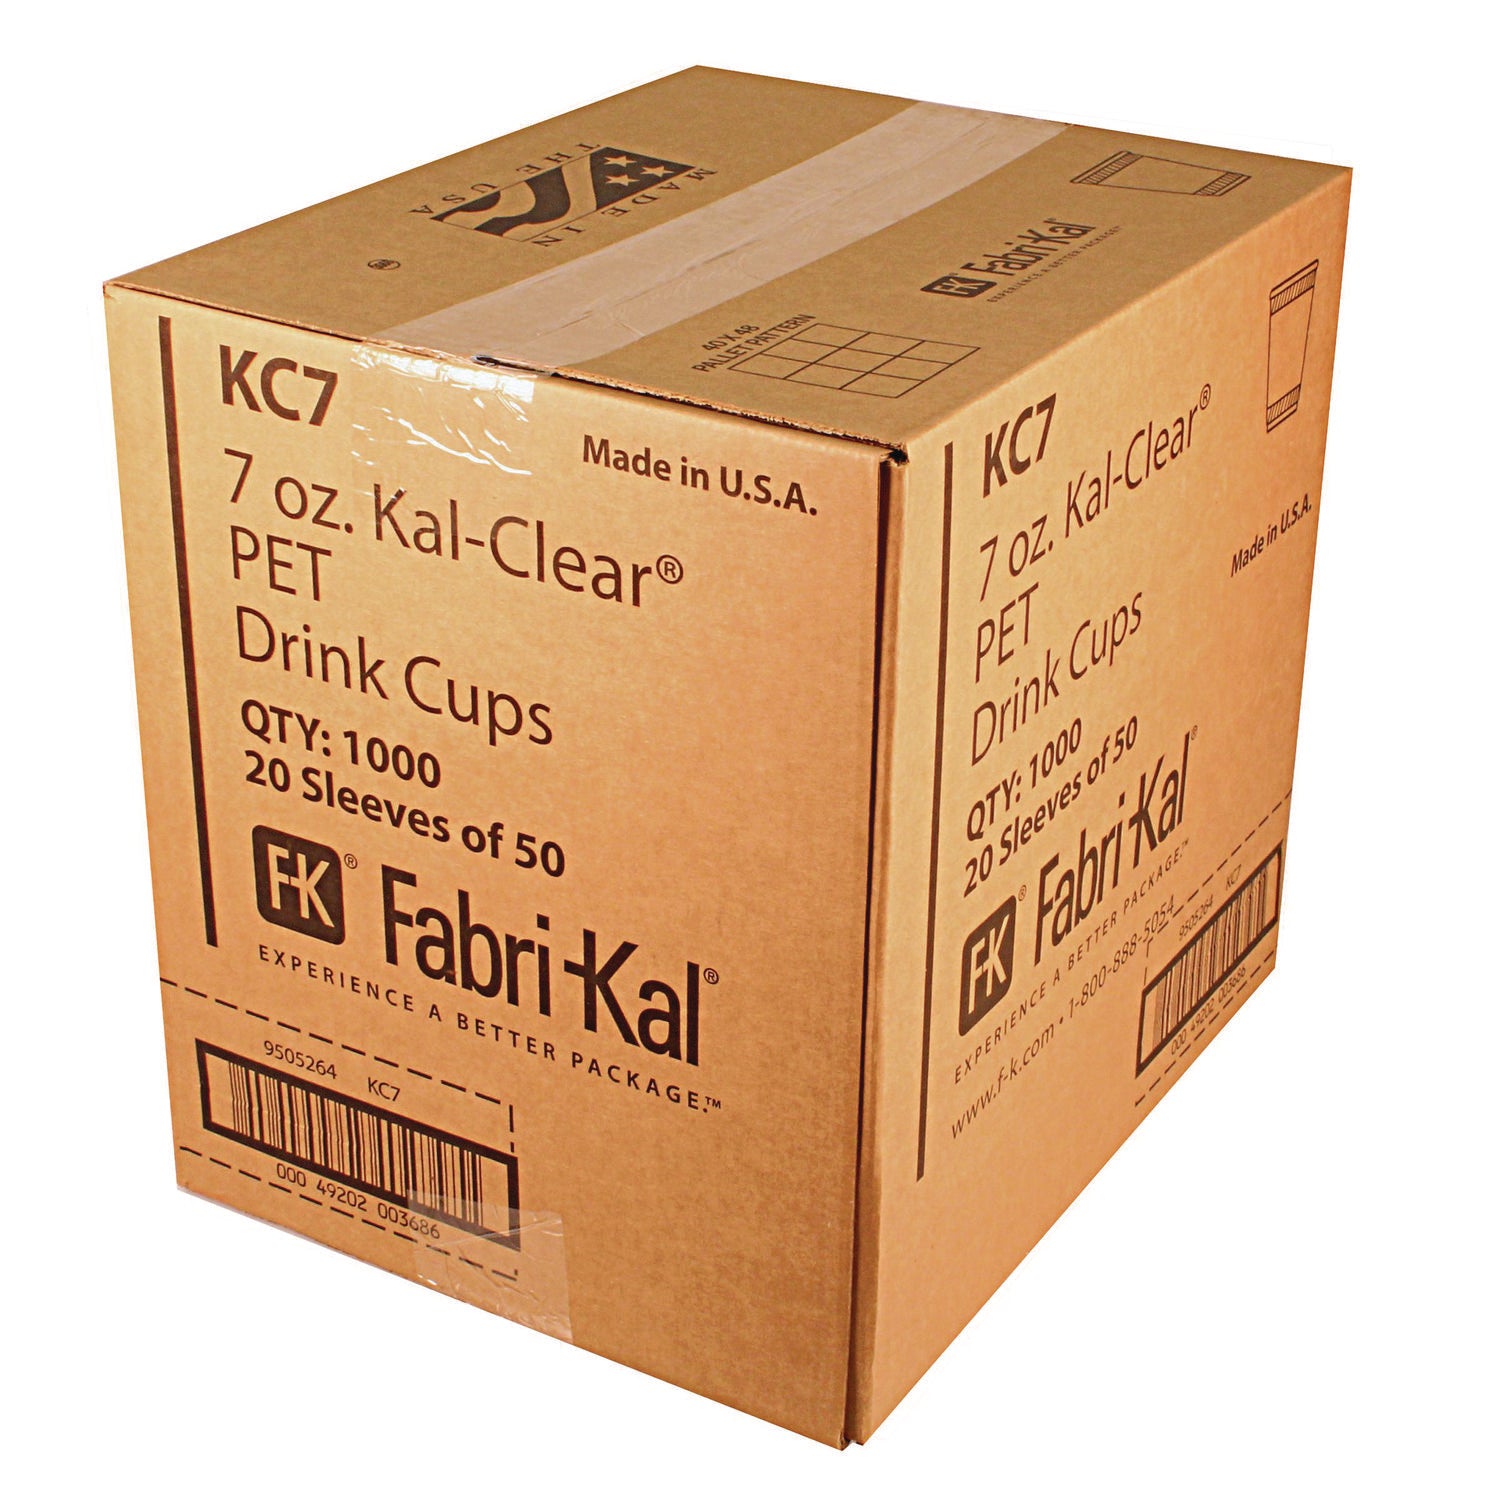 Kal-Clear PET Cold Drink Cups, 7 oz, Clear, 1,000/Carton - 2